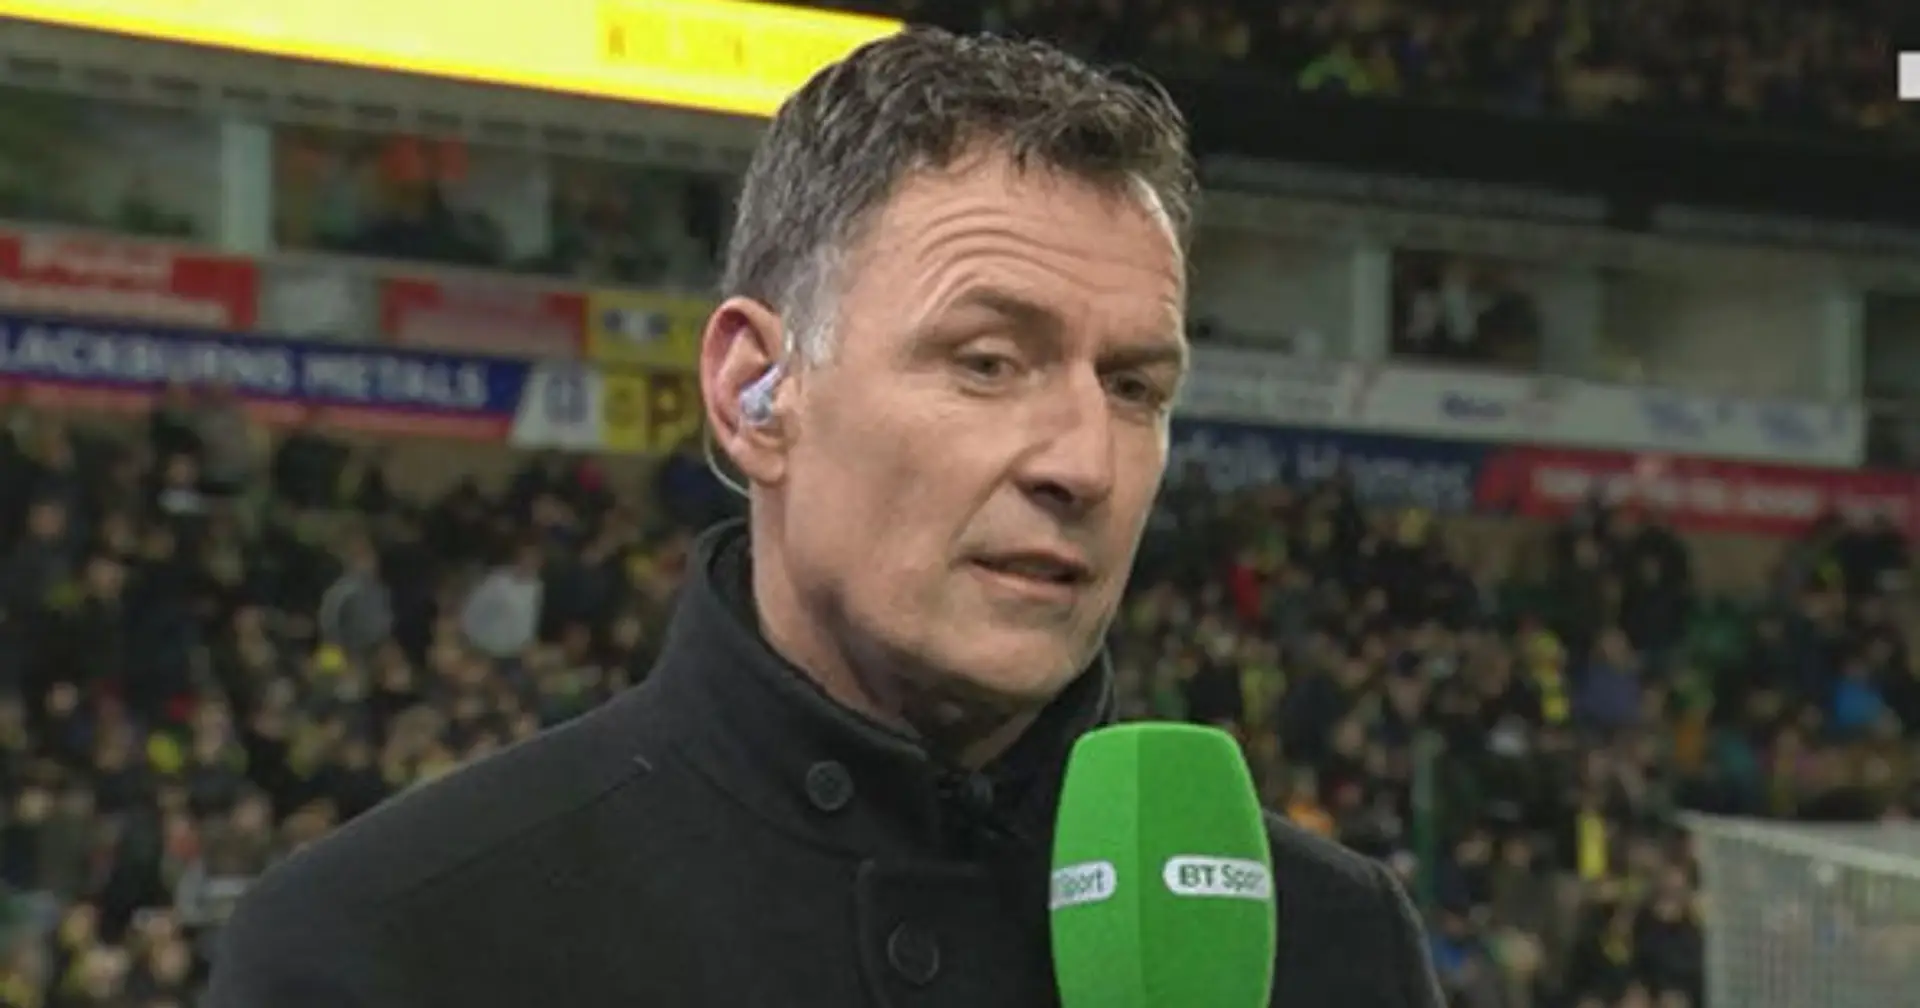 'Don't be so stupid': Chris Sutton dismisses suggestion Man United can triumph over Liverpool